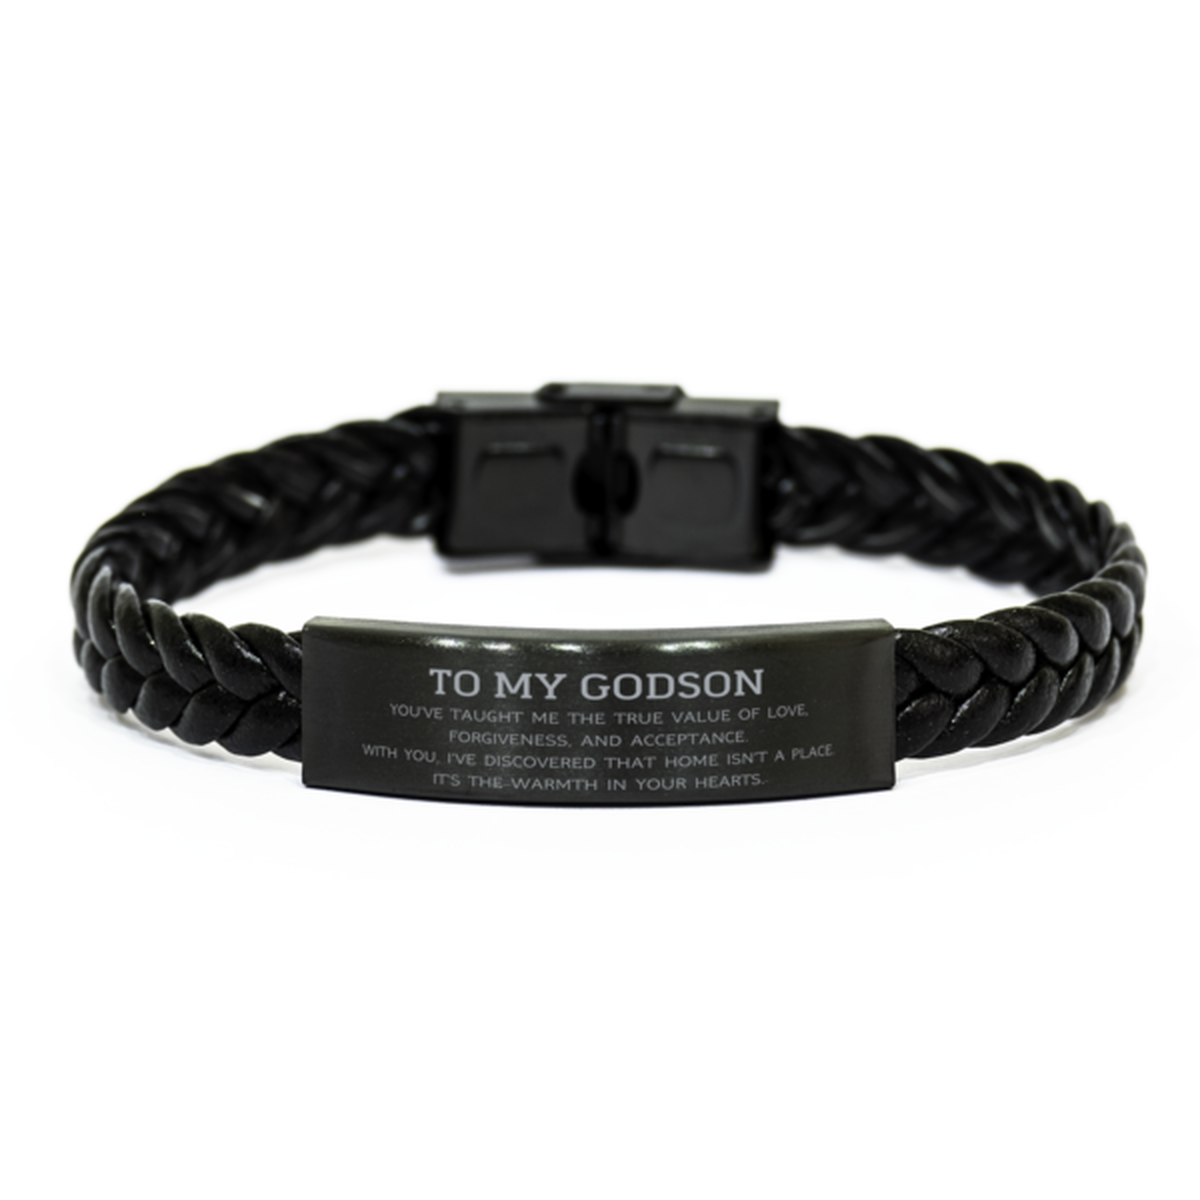 To My Godson Gifts, You've taught me the true value of love, Thank You Gifts For Godson, Birthday Braided Leather Bracelet For Godson